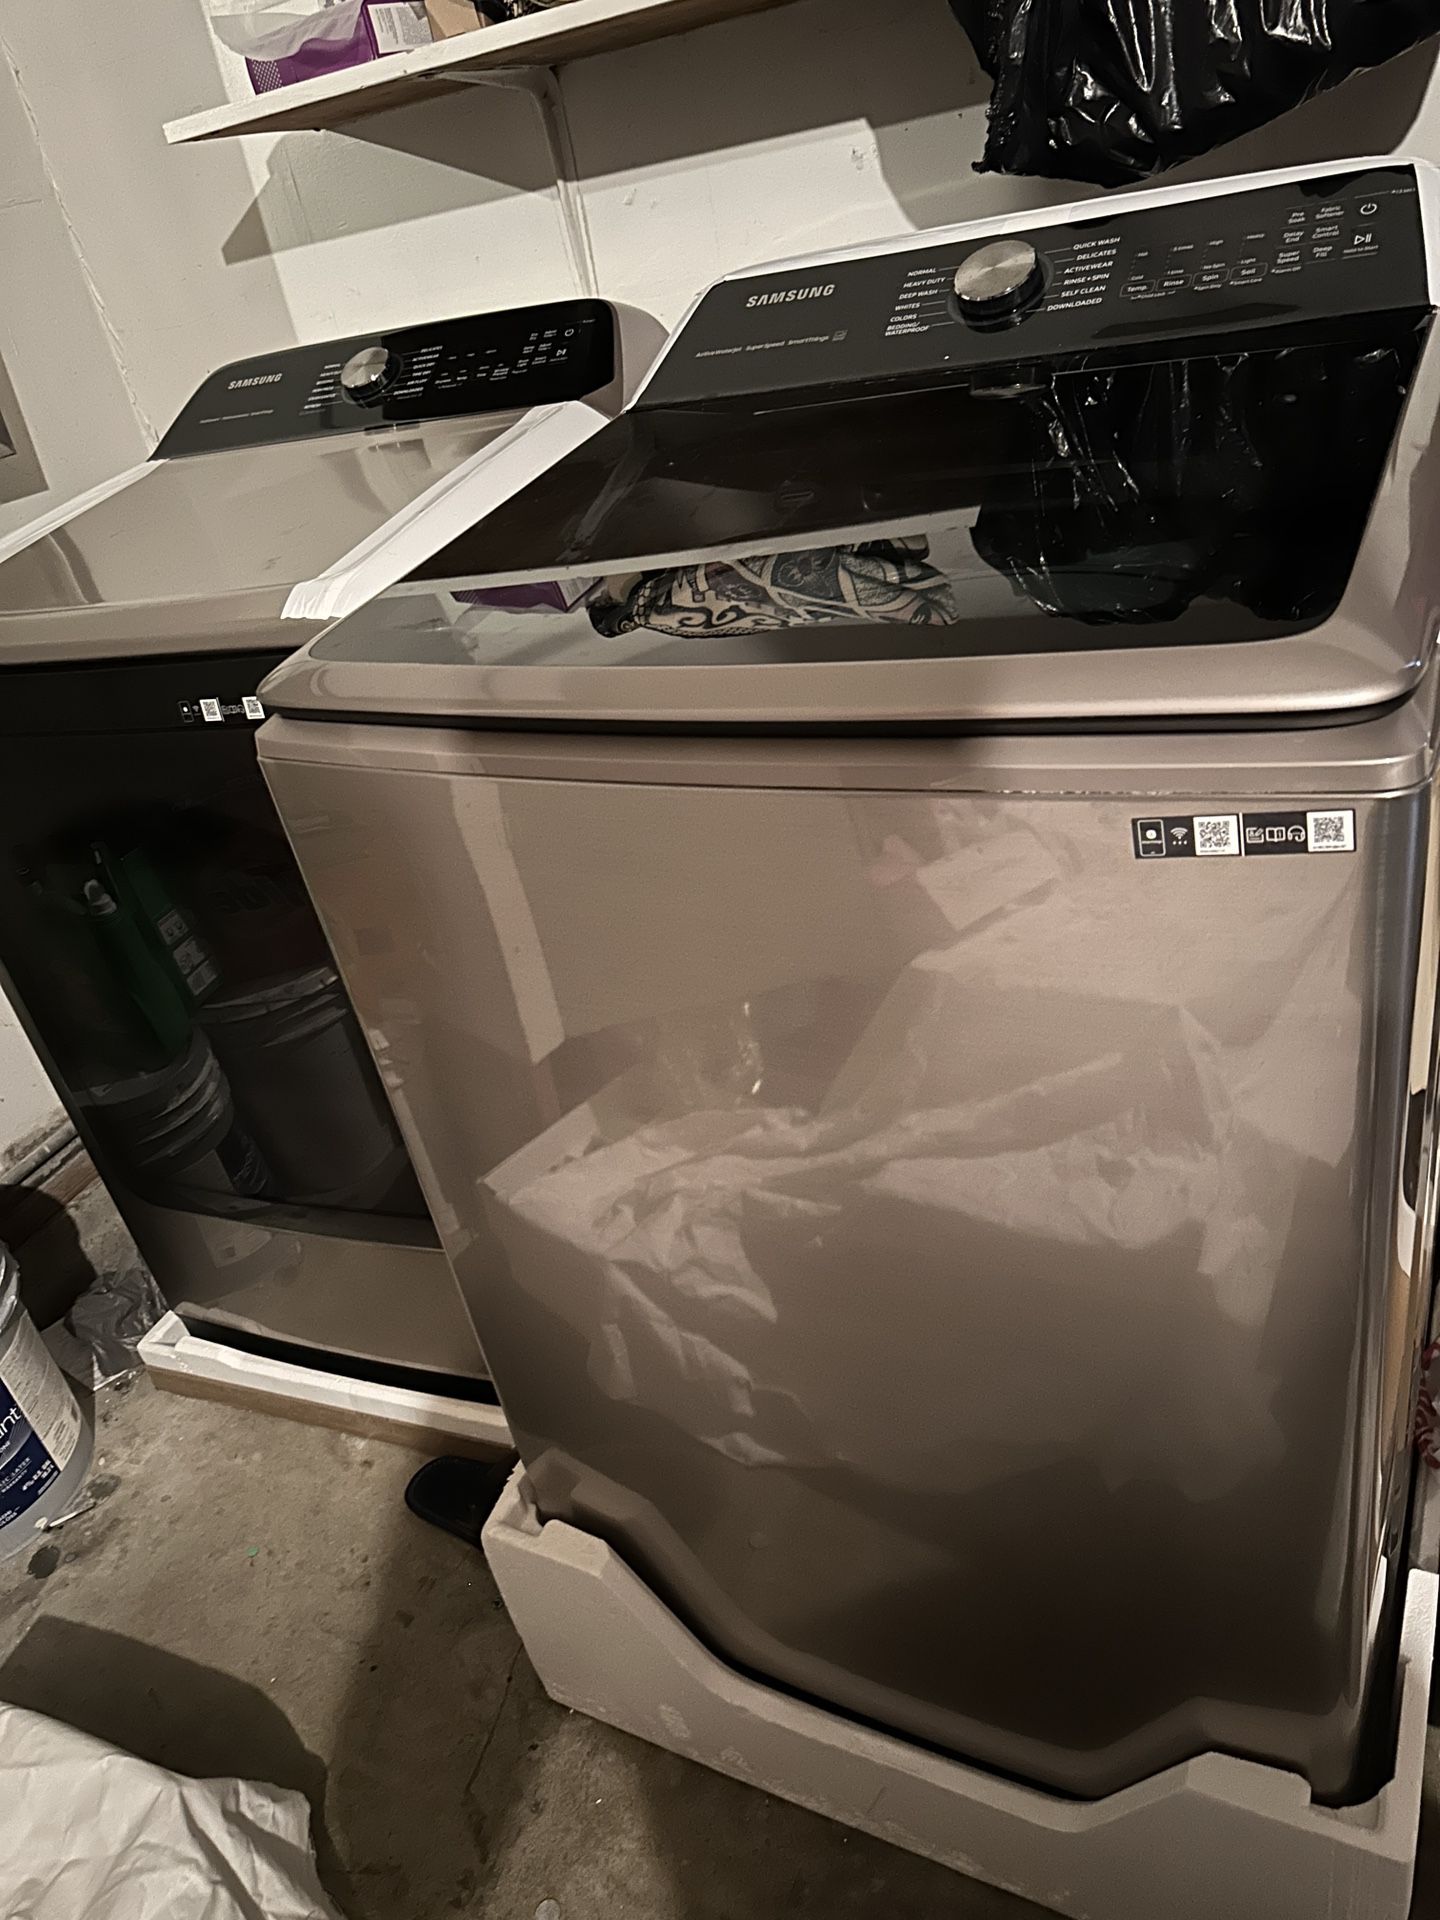 Samsung Washer and Dryer (Brand new)